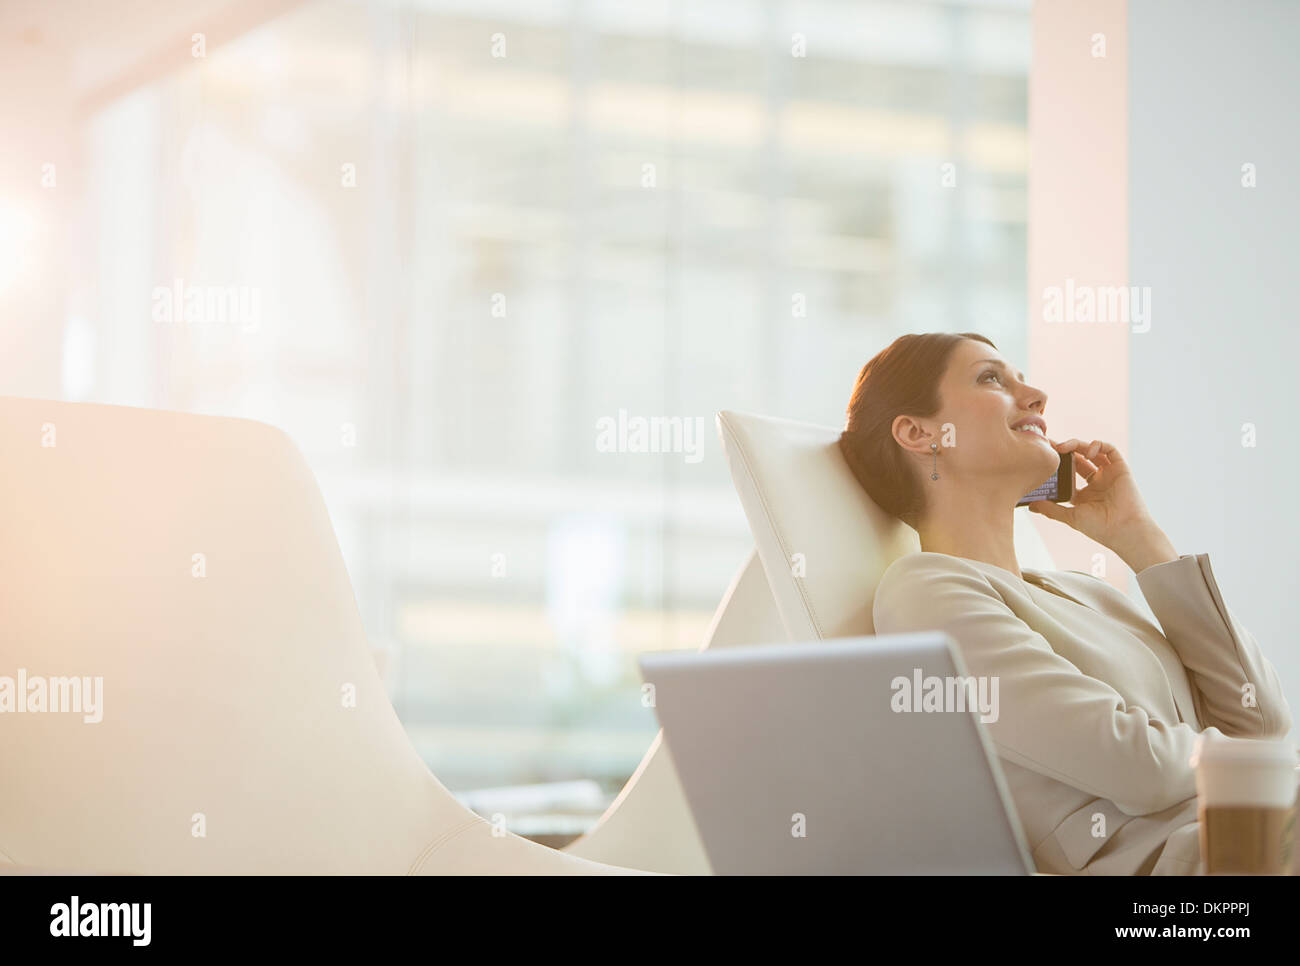 Businesswoman talking on cell phone in office Banque D'Images